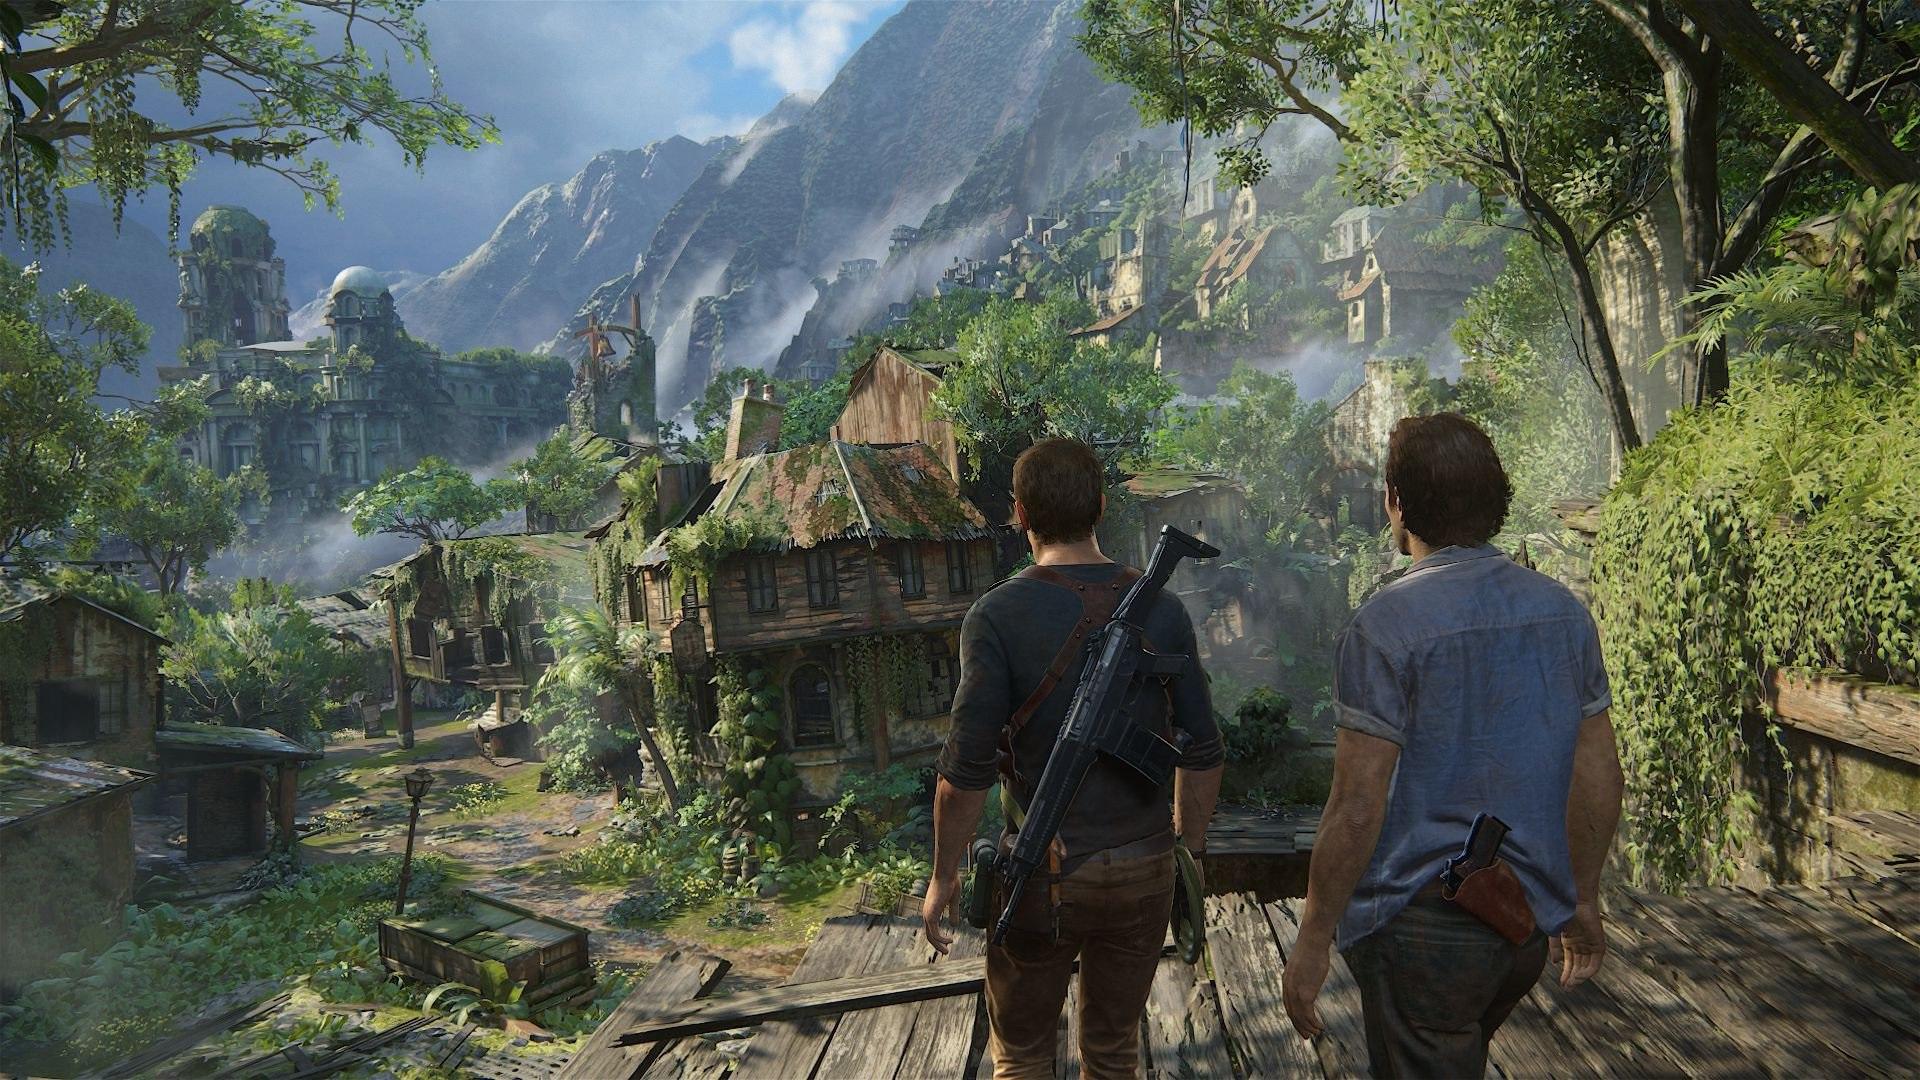 Group of Ruins Wallpaper Free Uncharted